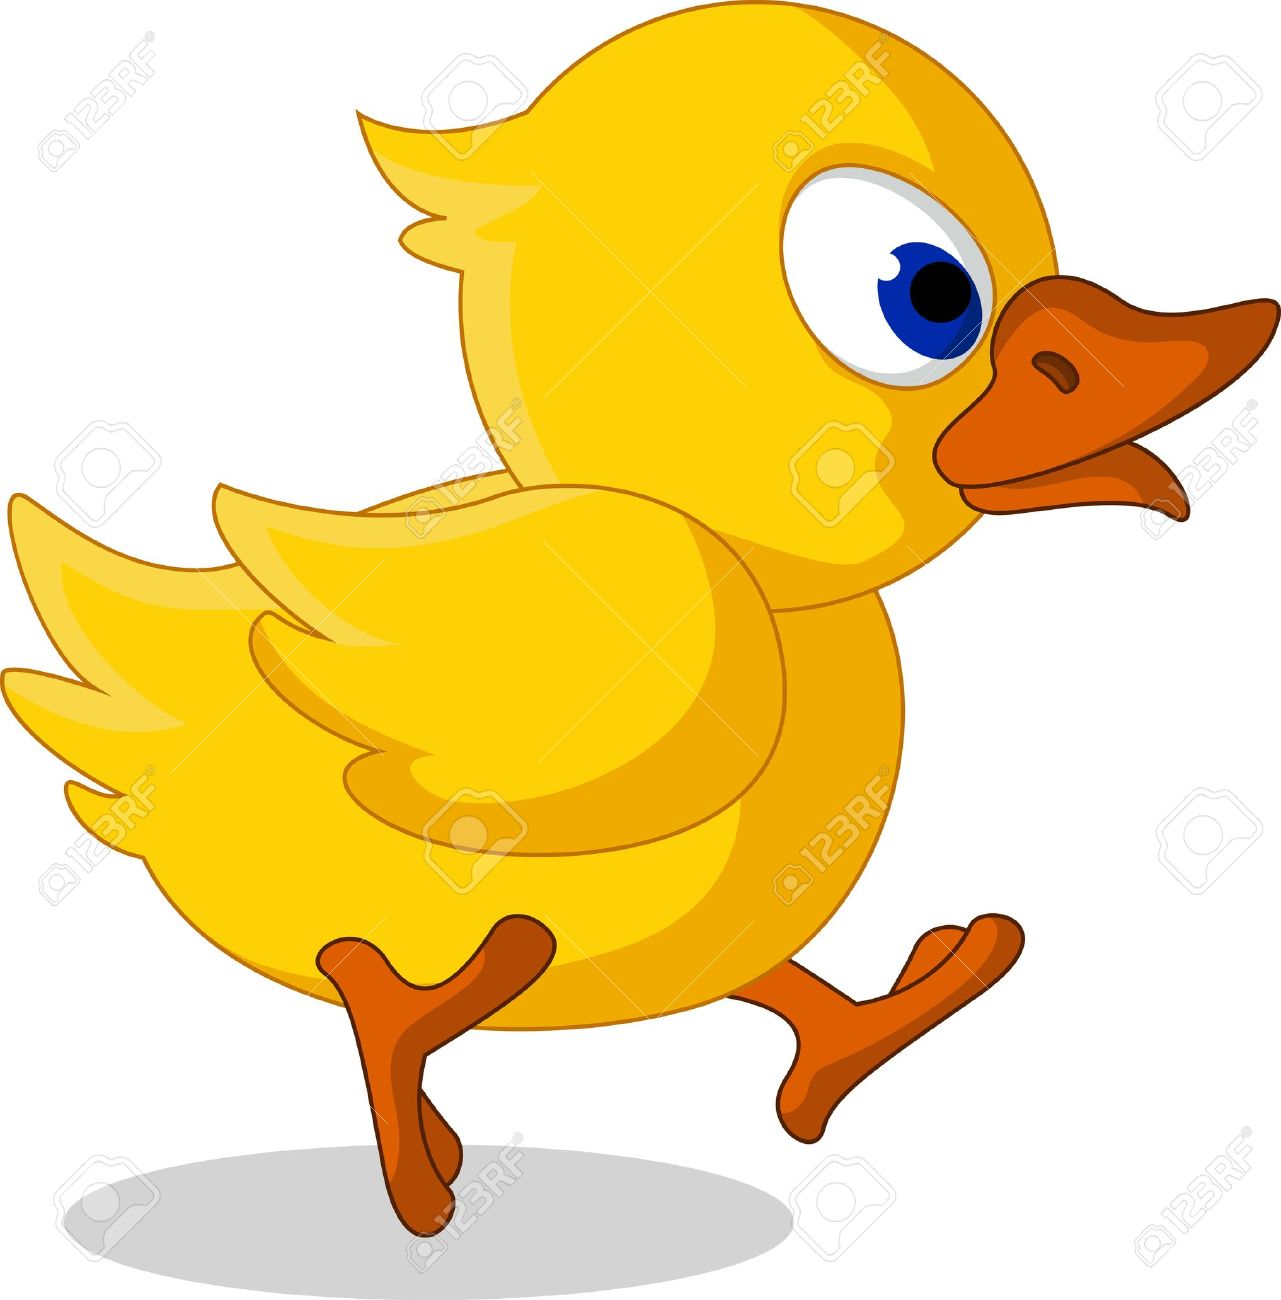 reverse search for: cartoon duck